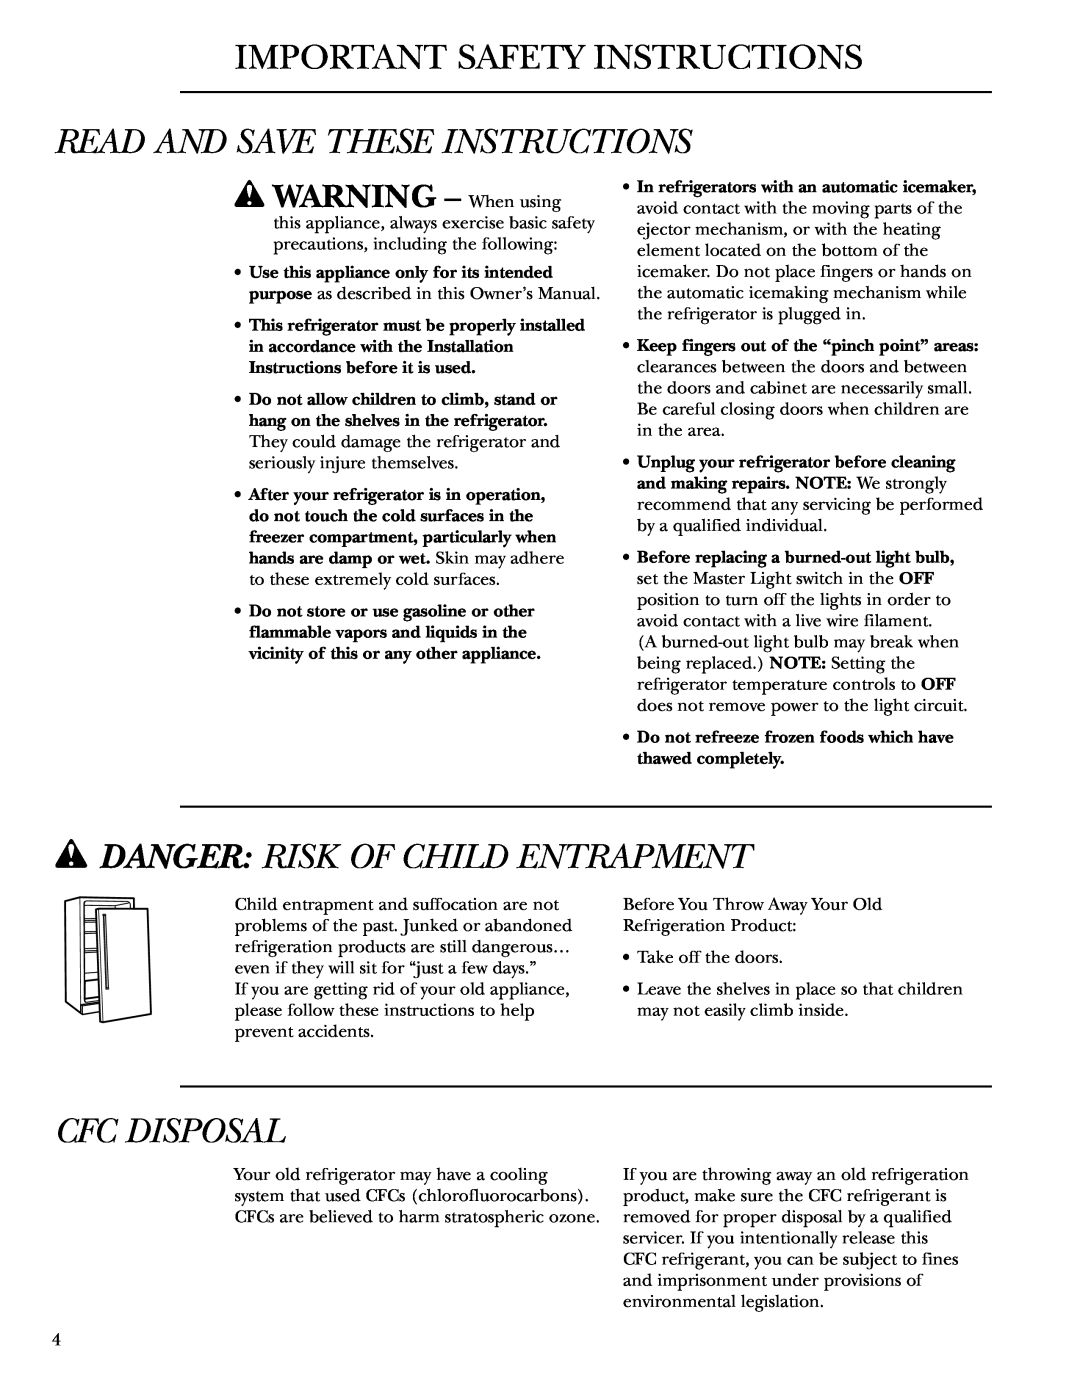 GE Monogram ZIS42NCA Important Safety Instructions, Read And Save These Instructions, wDANGER RISK OF CHILD ENTRAPMENT 